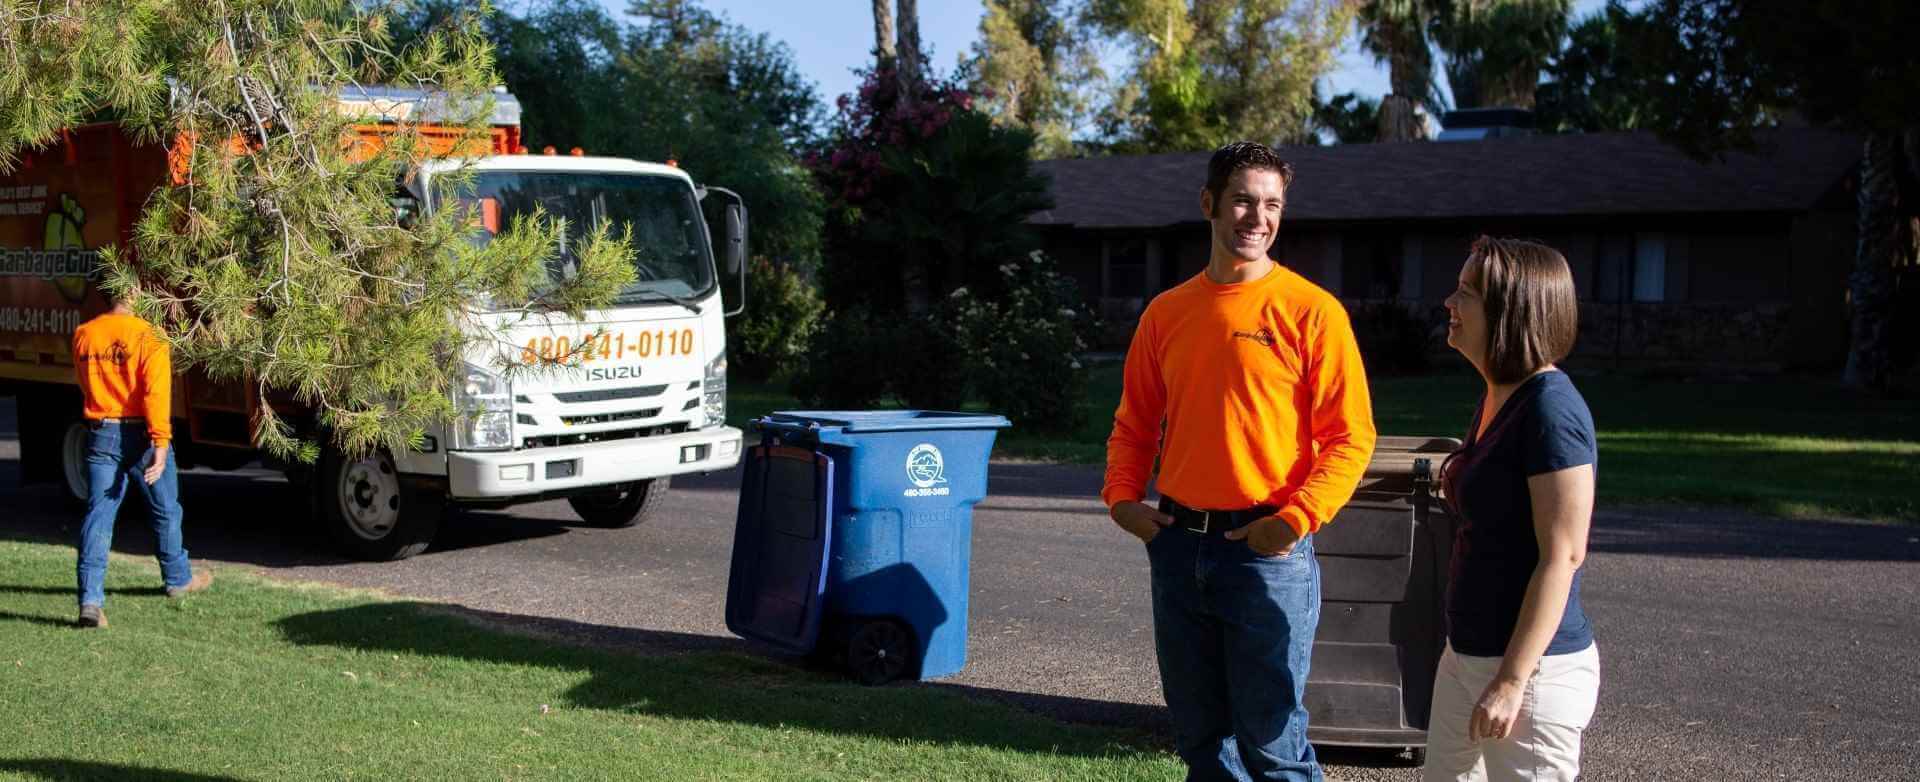 Junk removal in Fountain Hills, AZ